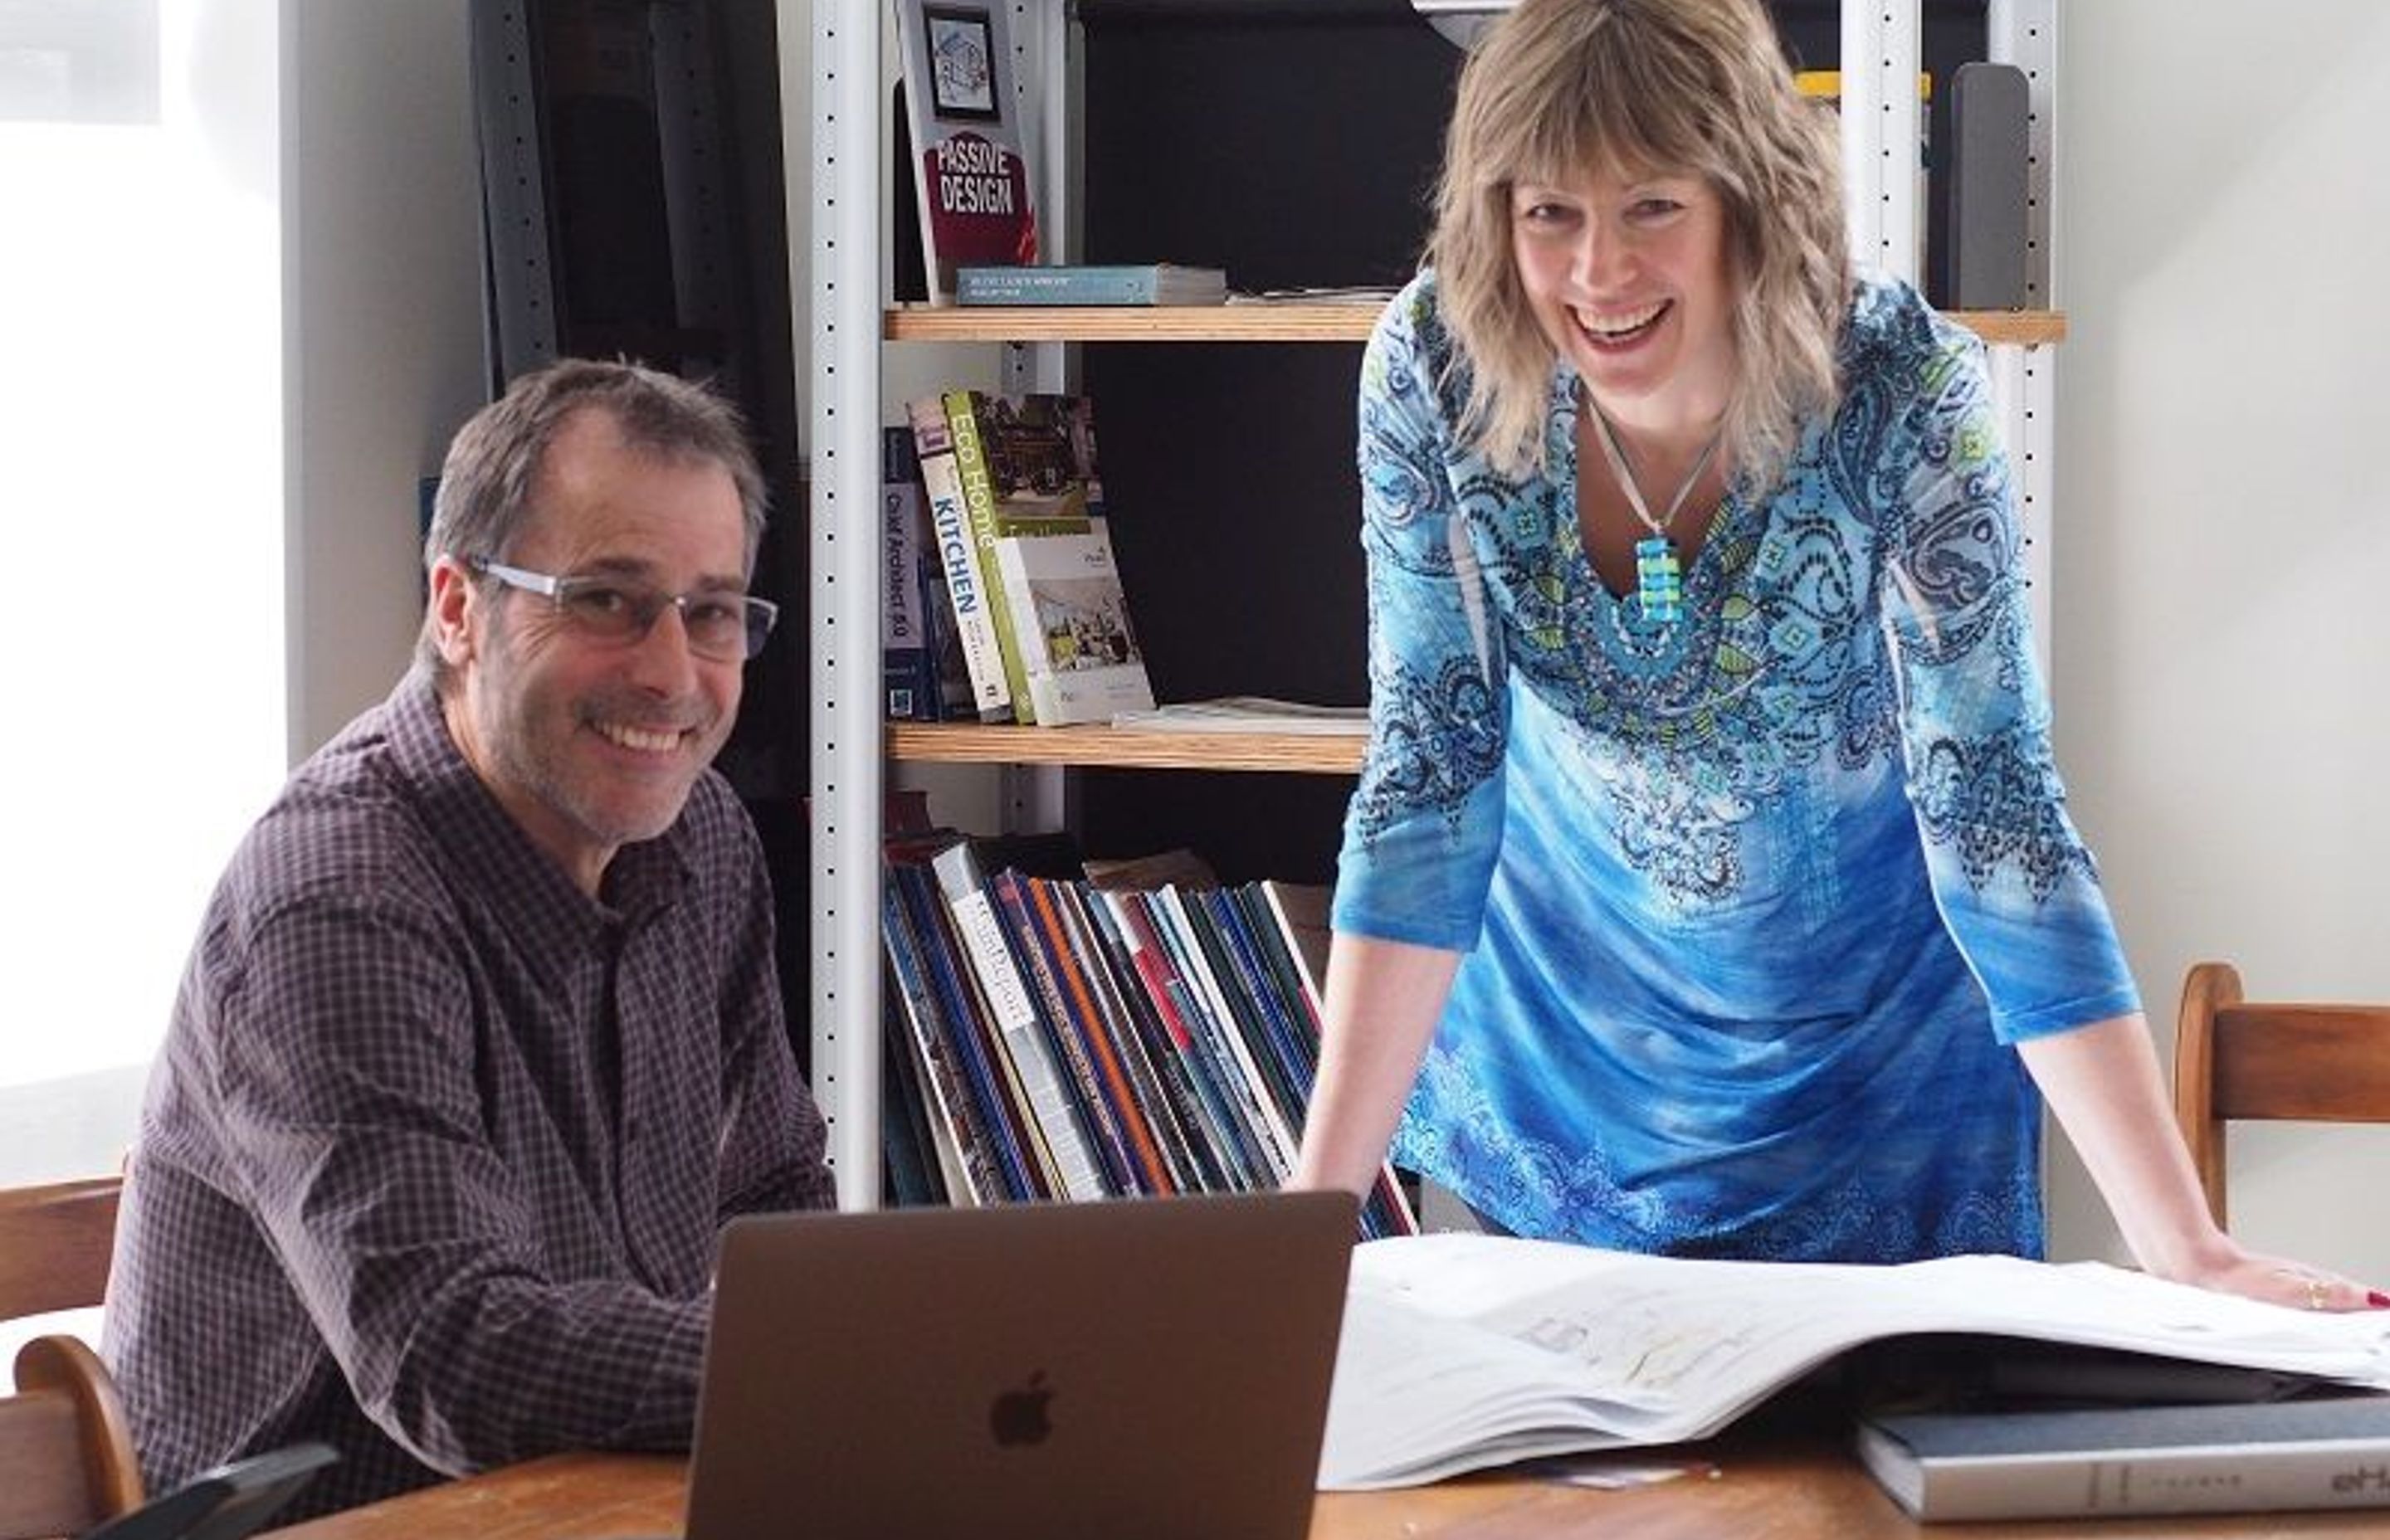 Neil McMillan, our architectural designer and Trudi Baird, administration/accounts, in our meeting room

